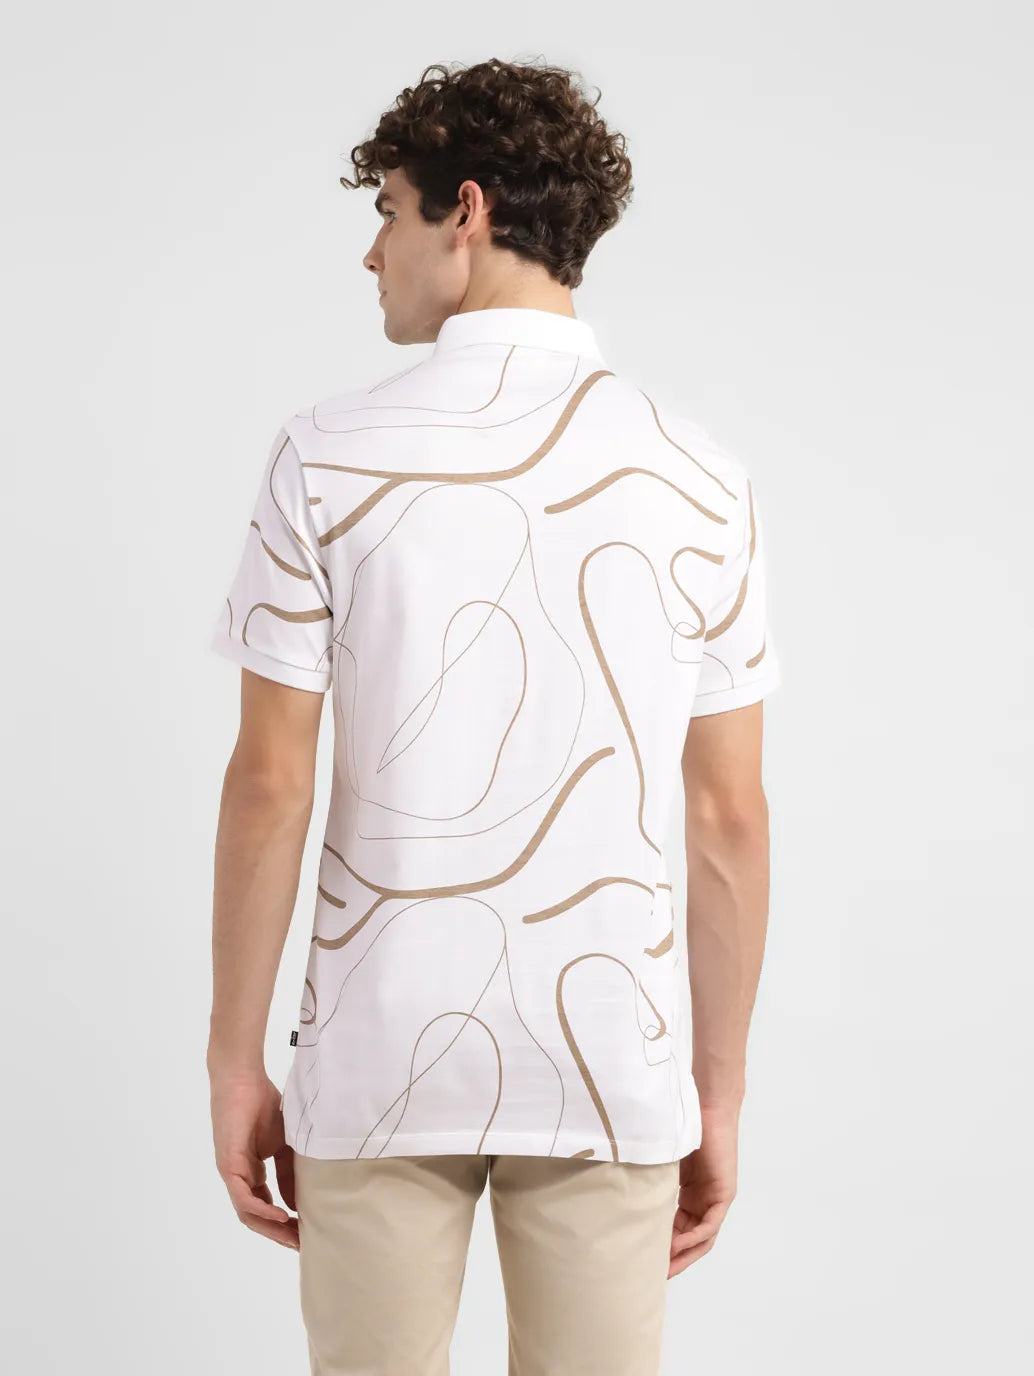 Men's Abstract Slim Fit Polo T-shirt